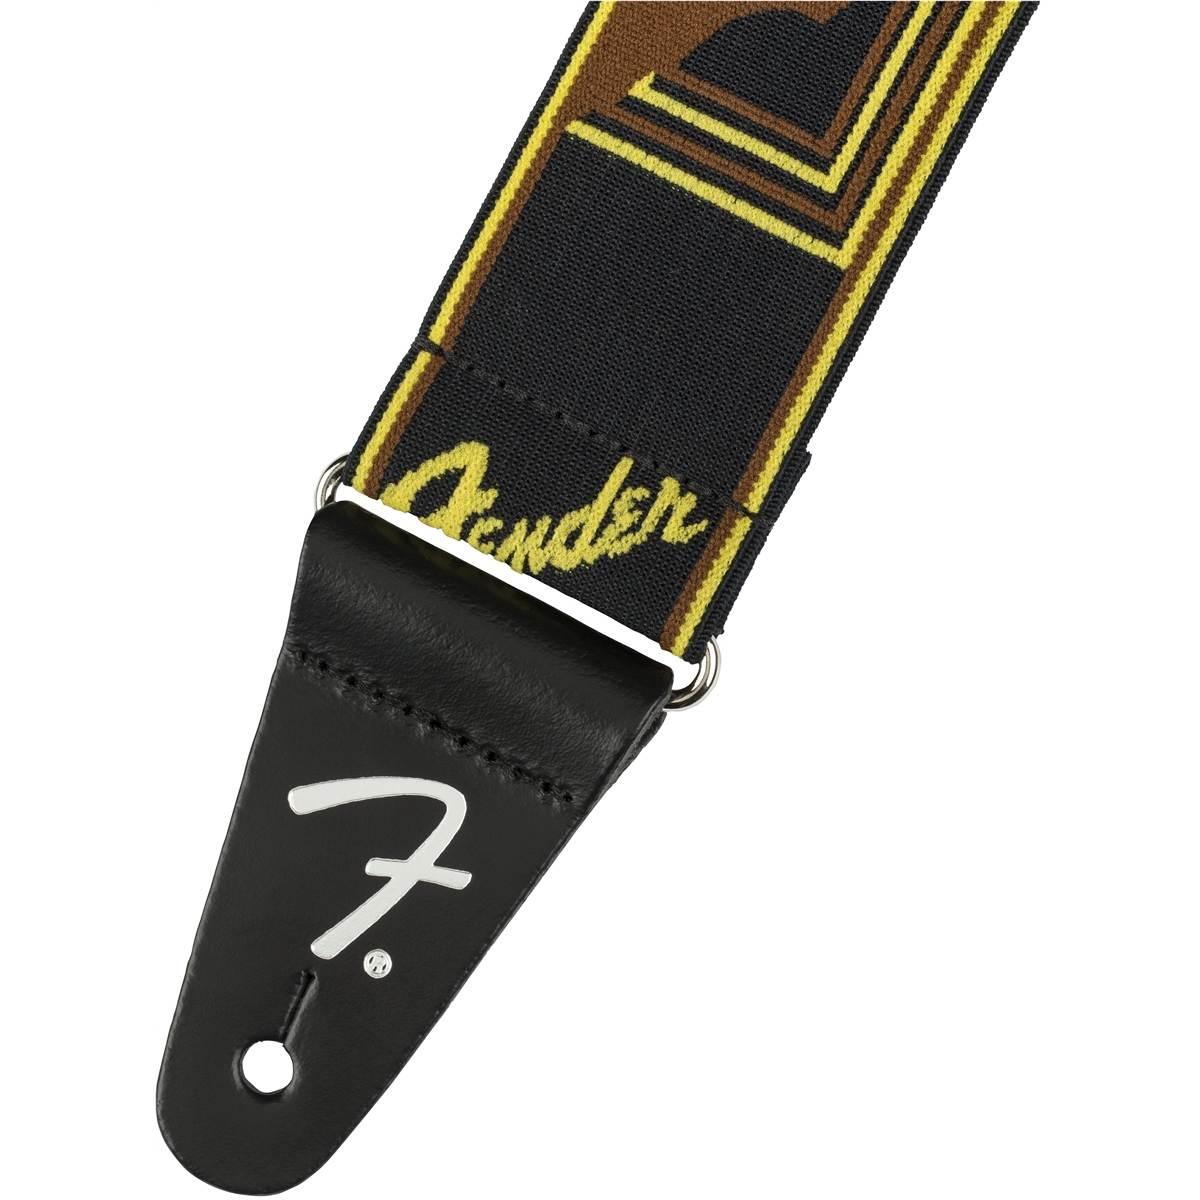 Fender weighless monogram tracolla per chitarra brown , yellow, black